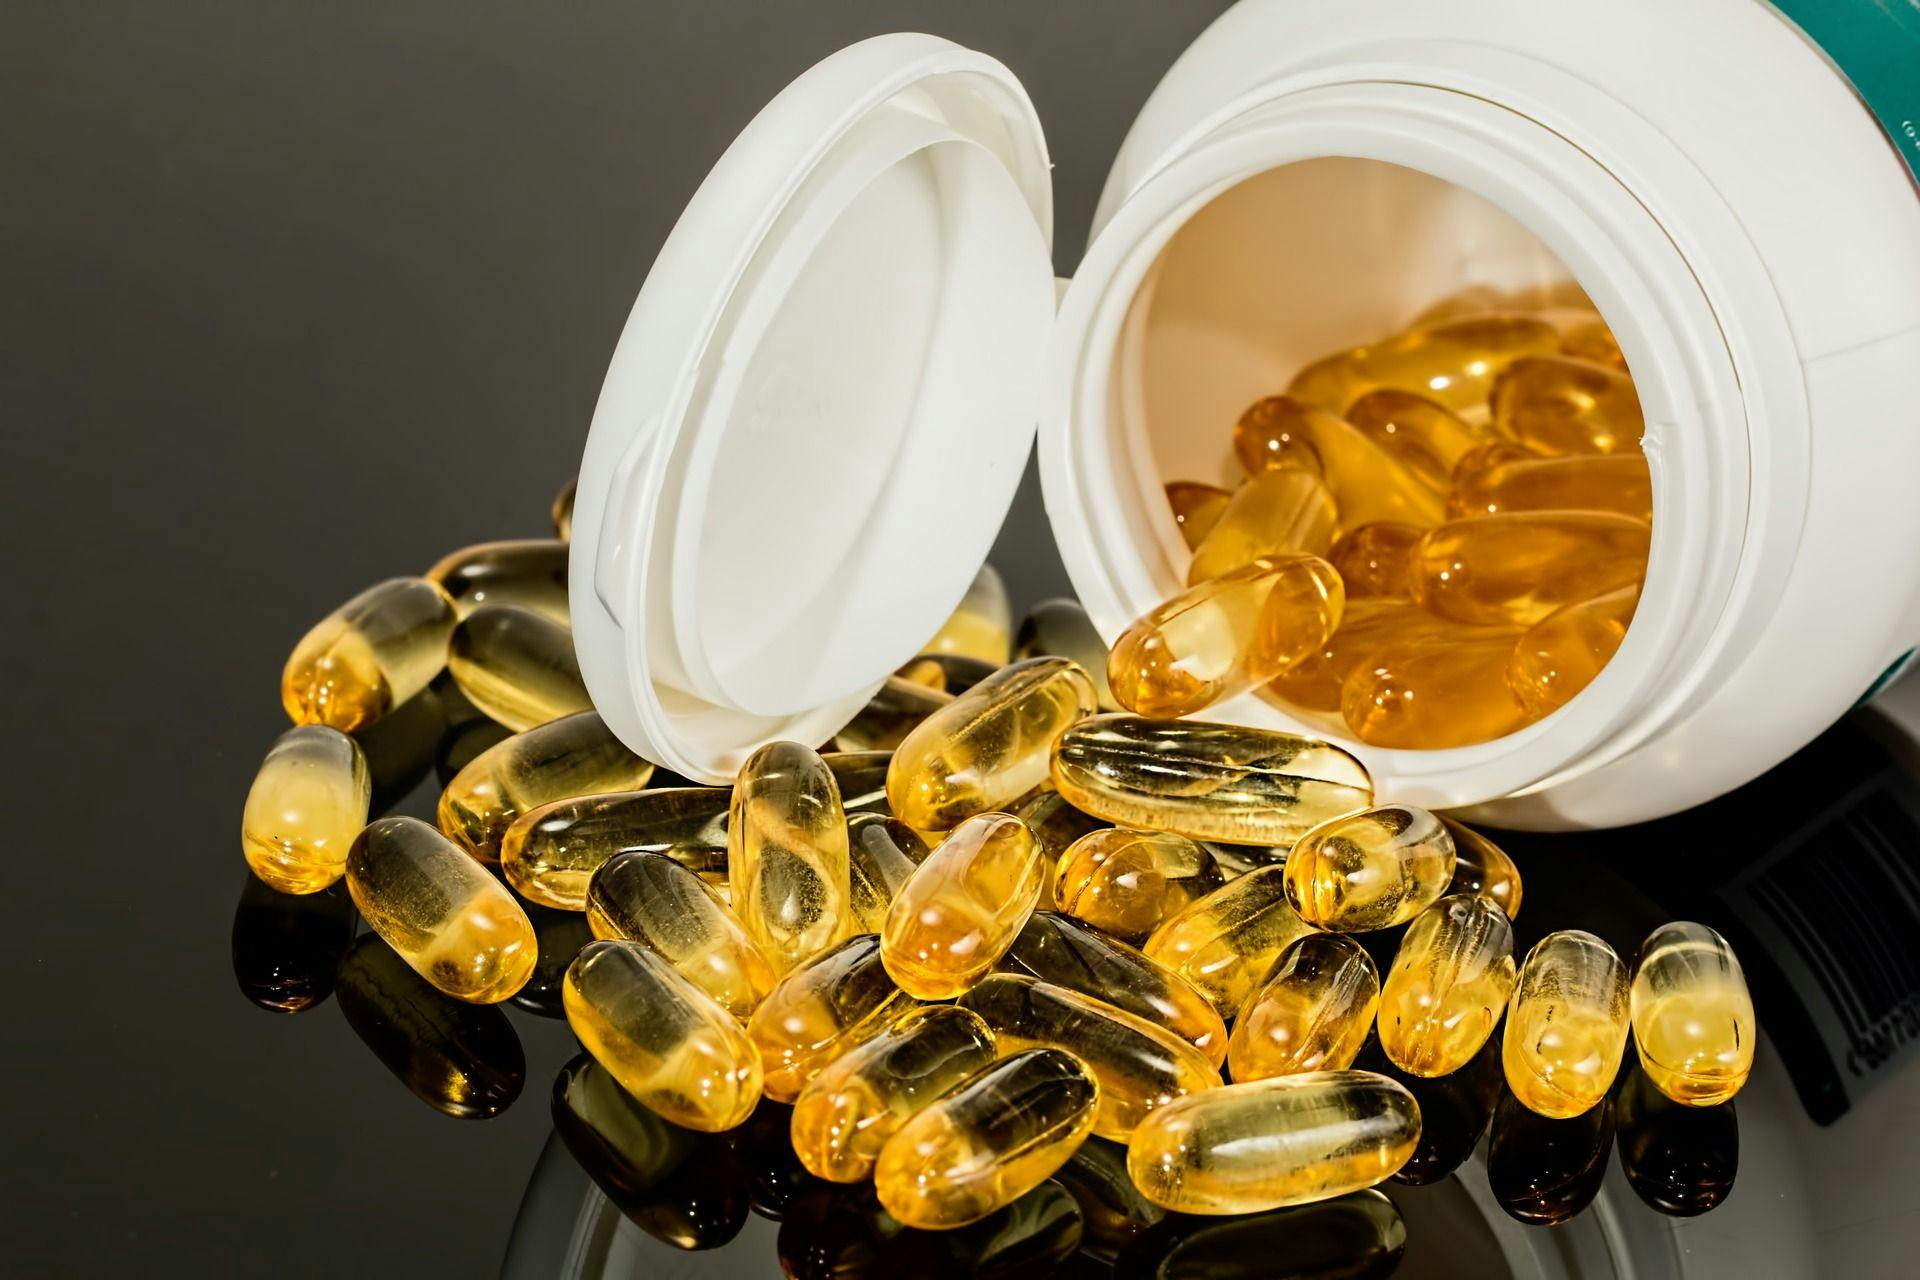 Top Trending Growth for Pharmacies in Dietary Supplements